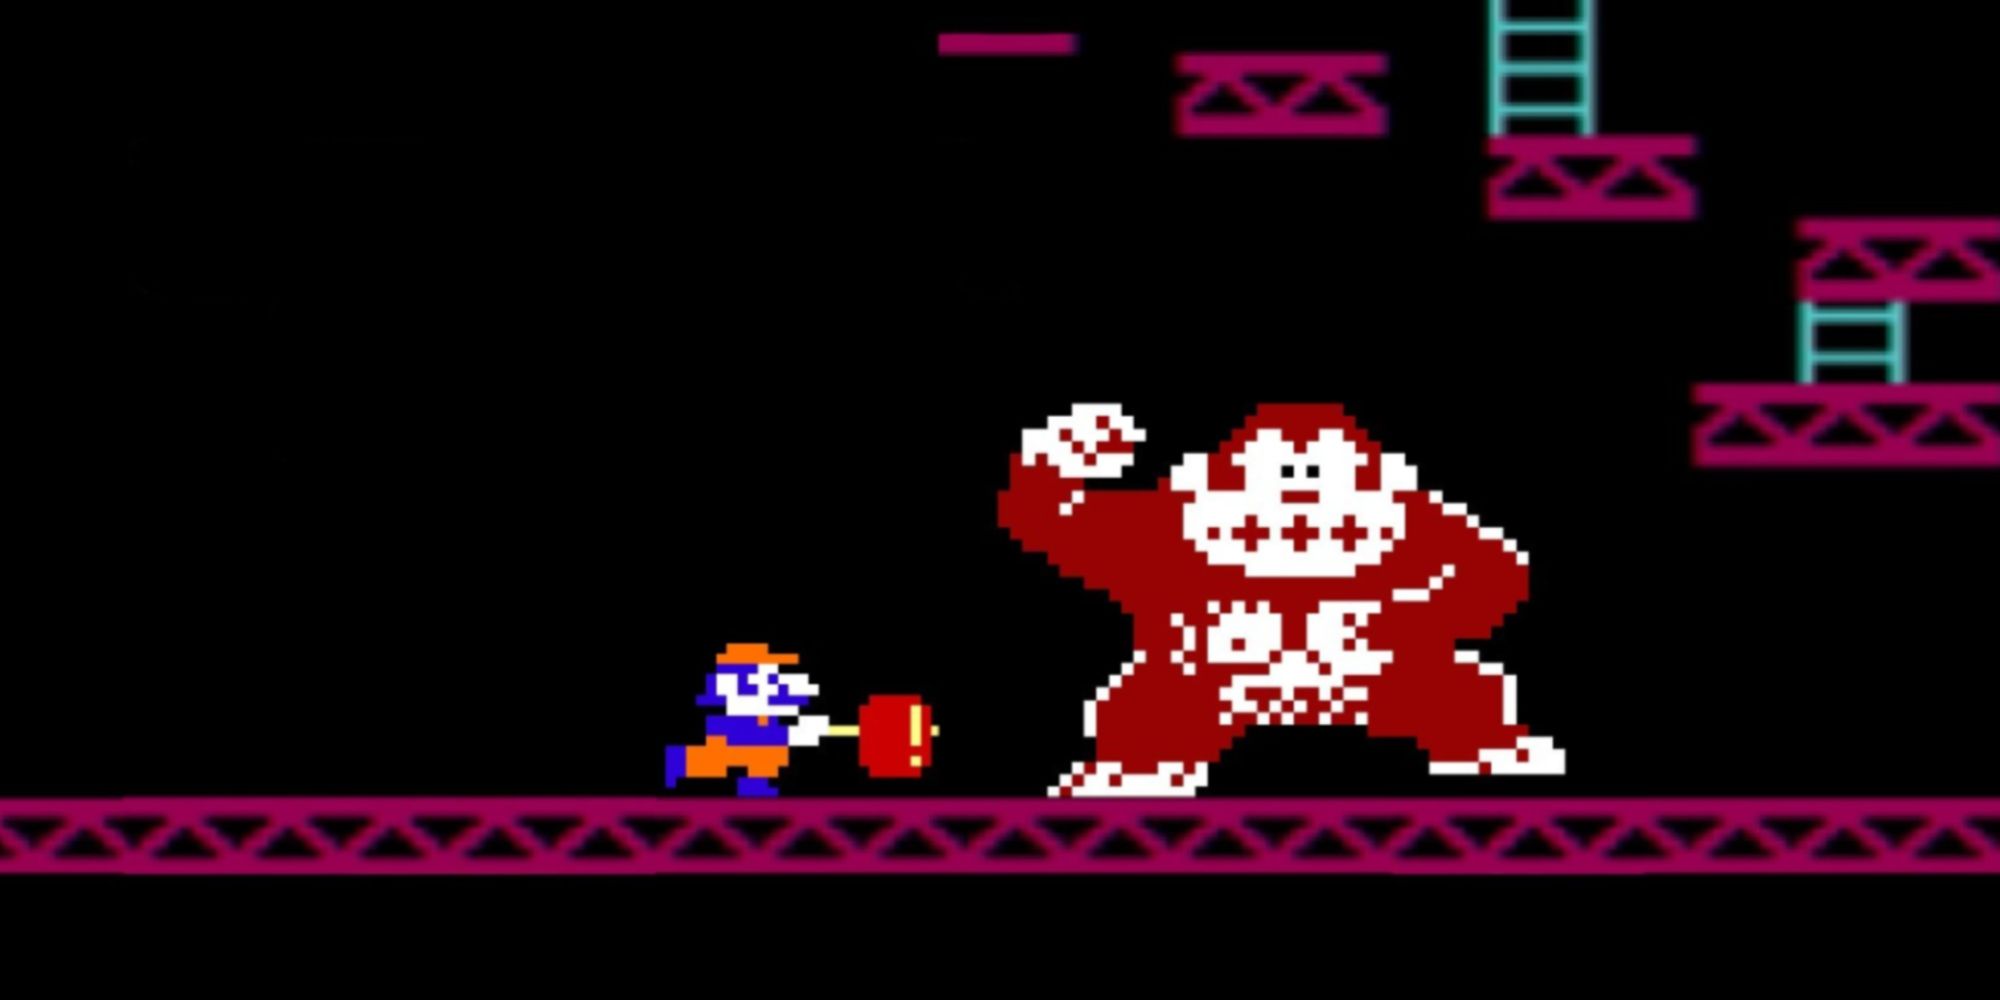 mario trying to hit donkey kong with a hammer